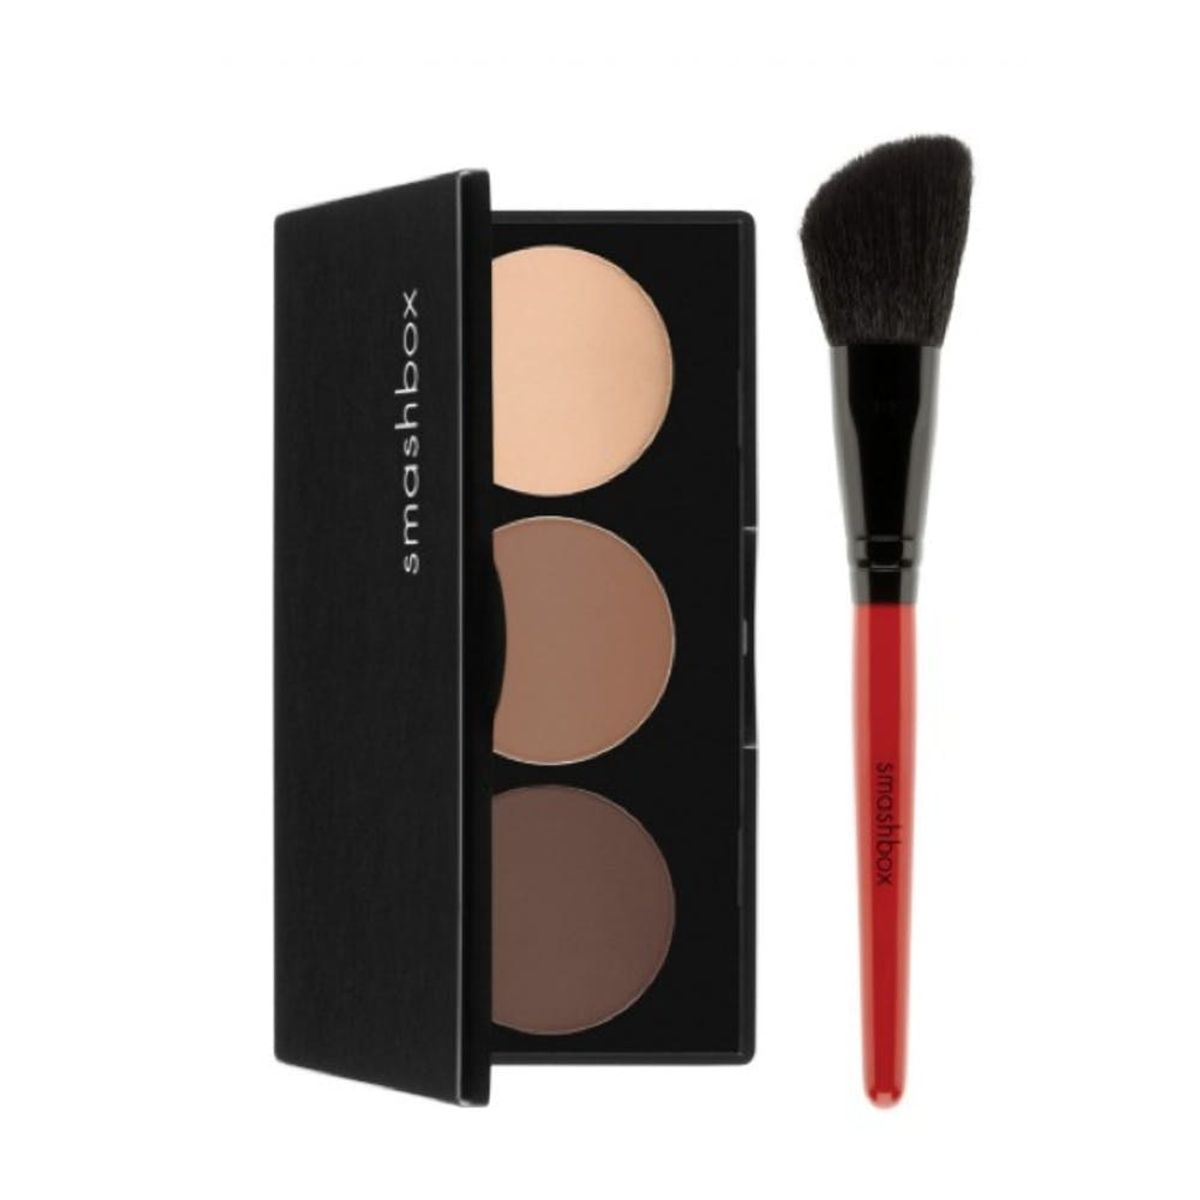 This New Tool Lets You Virtually Try On Every Single Smashbox Product